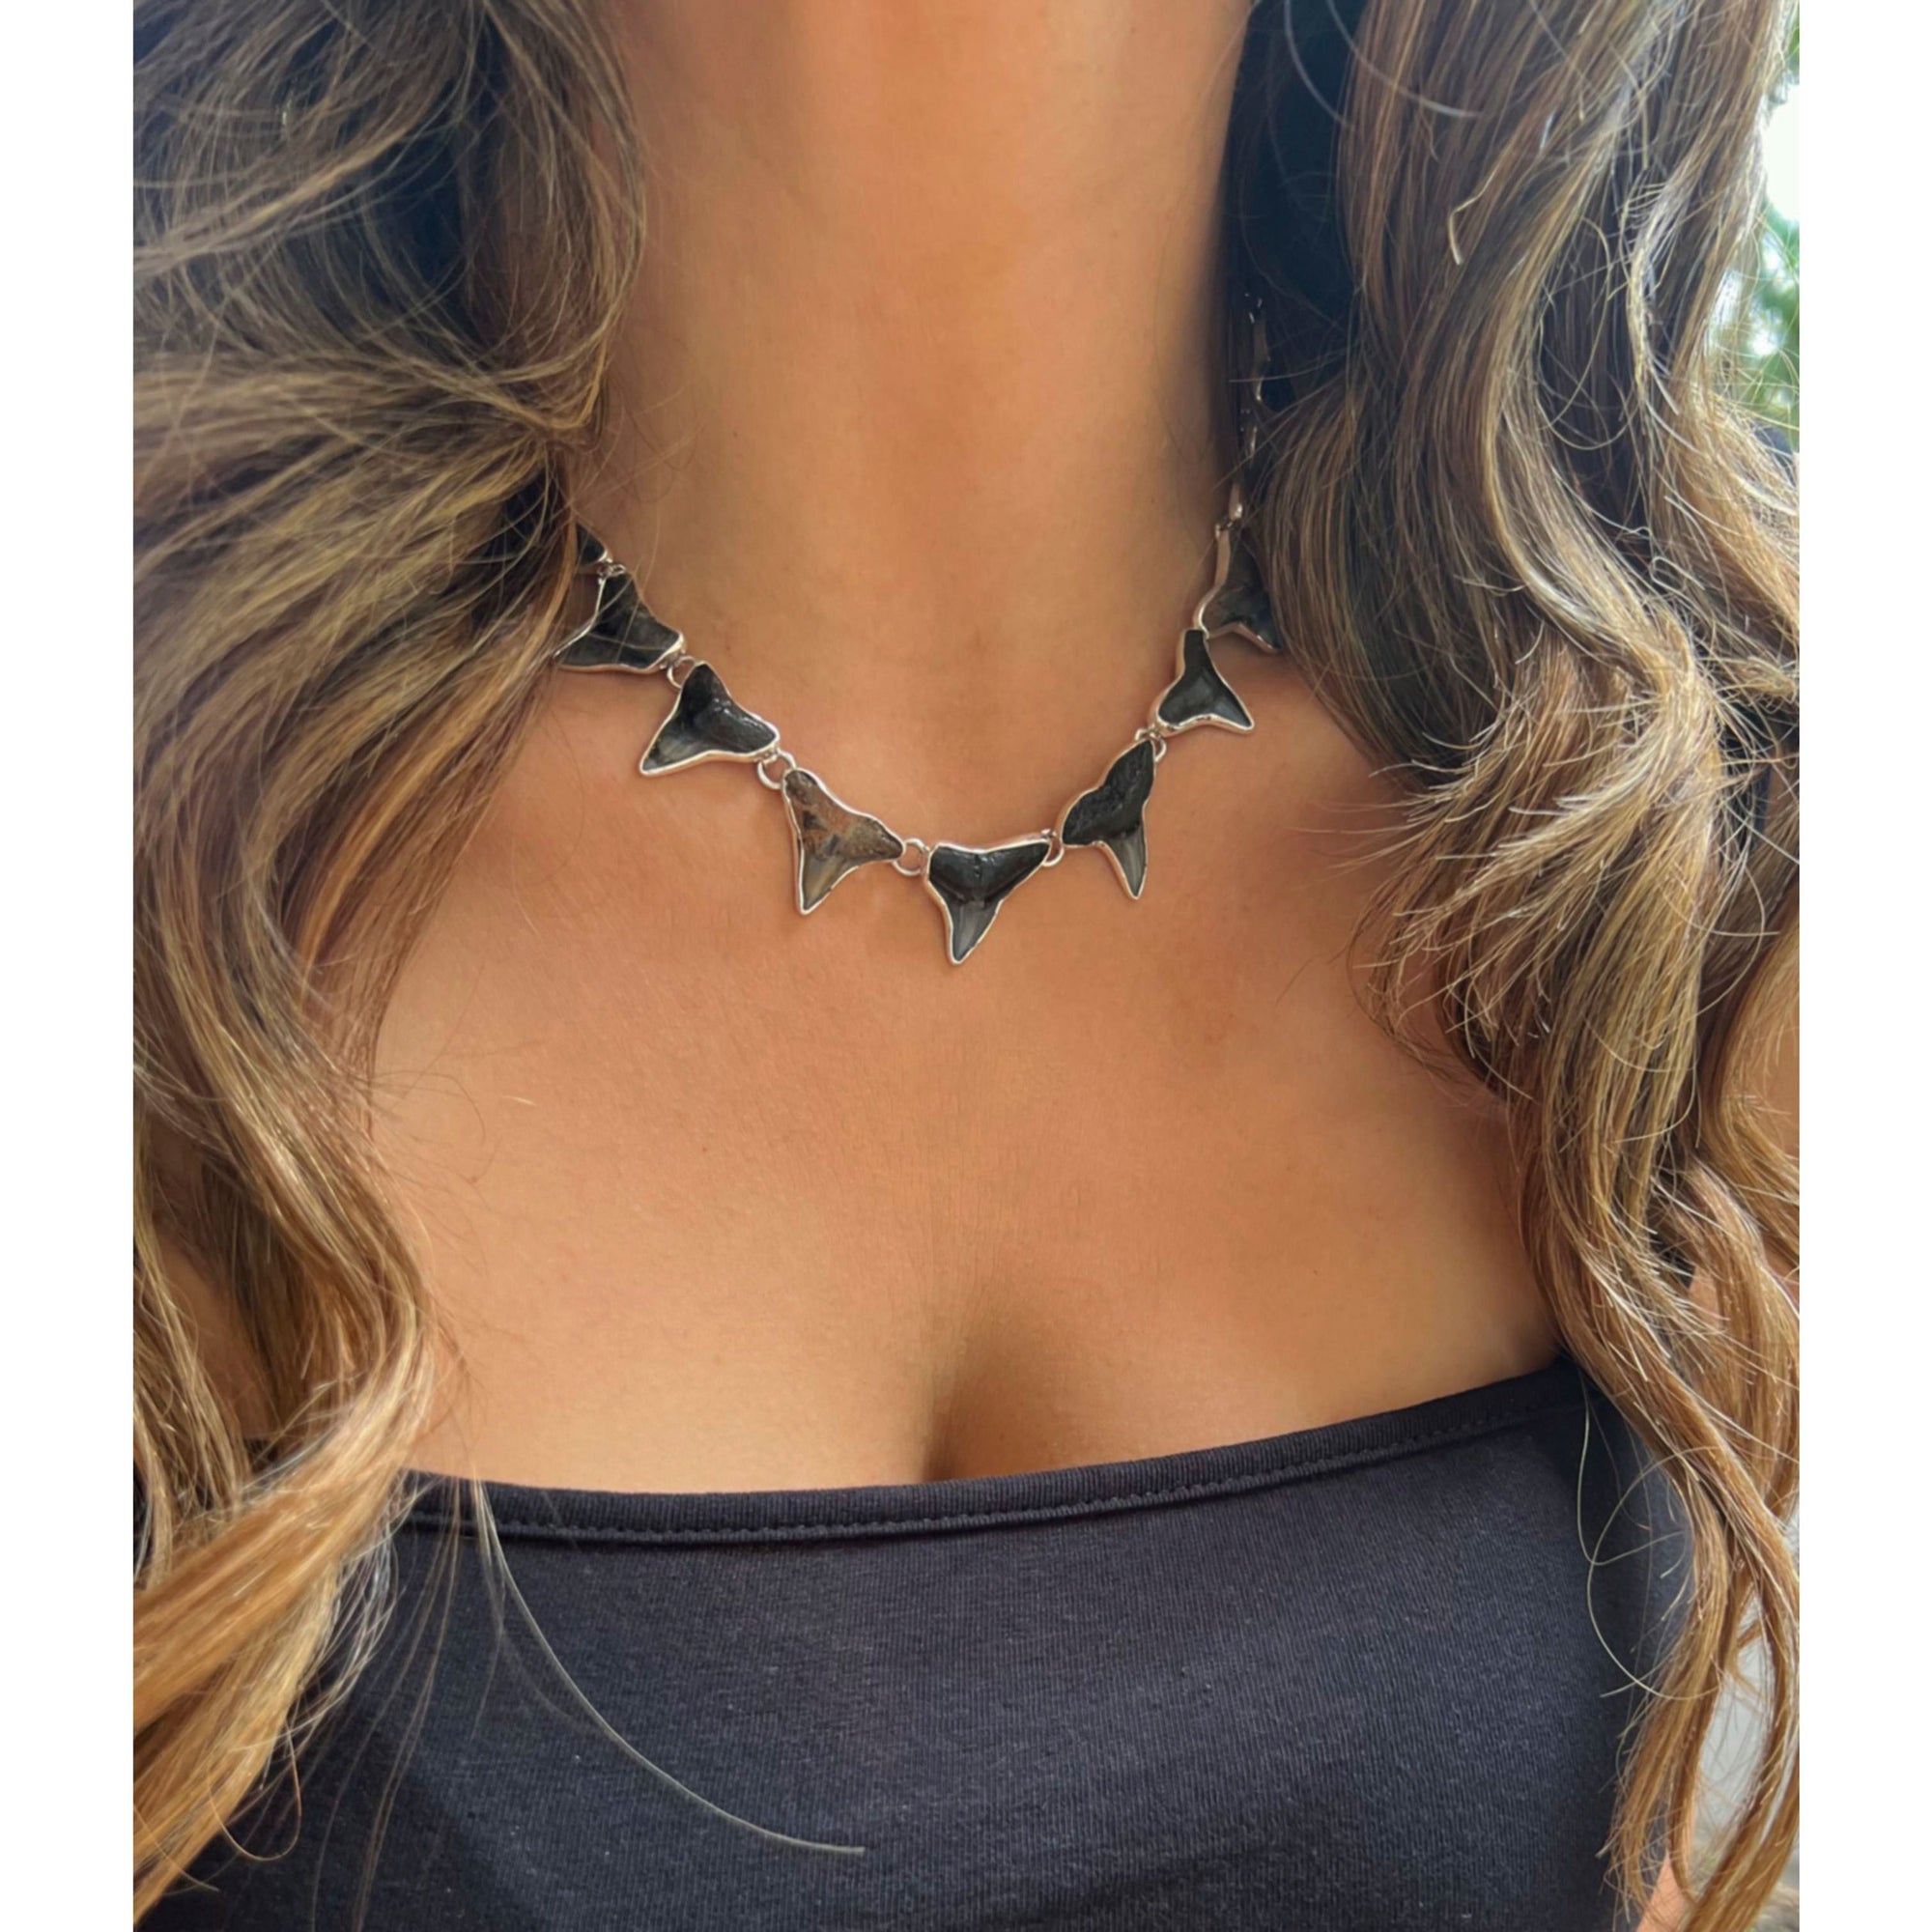 Buy Silver Shark Tooth Necklace Sterling Silver Shark Tooth Necklaces  Silver Shark Tooth Pendant Silver Shark Tooth Charm Womens Gift for Her  Online in India - Etsy